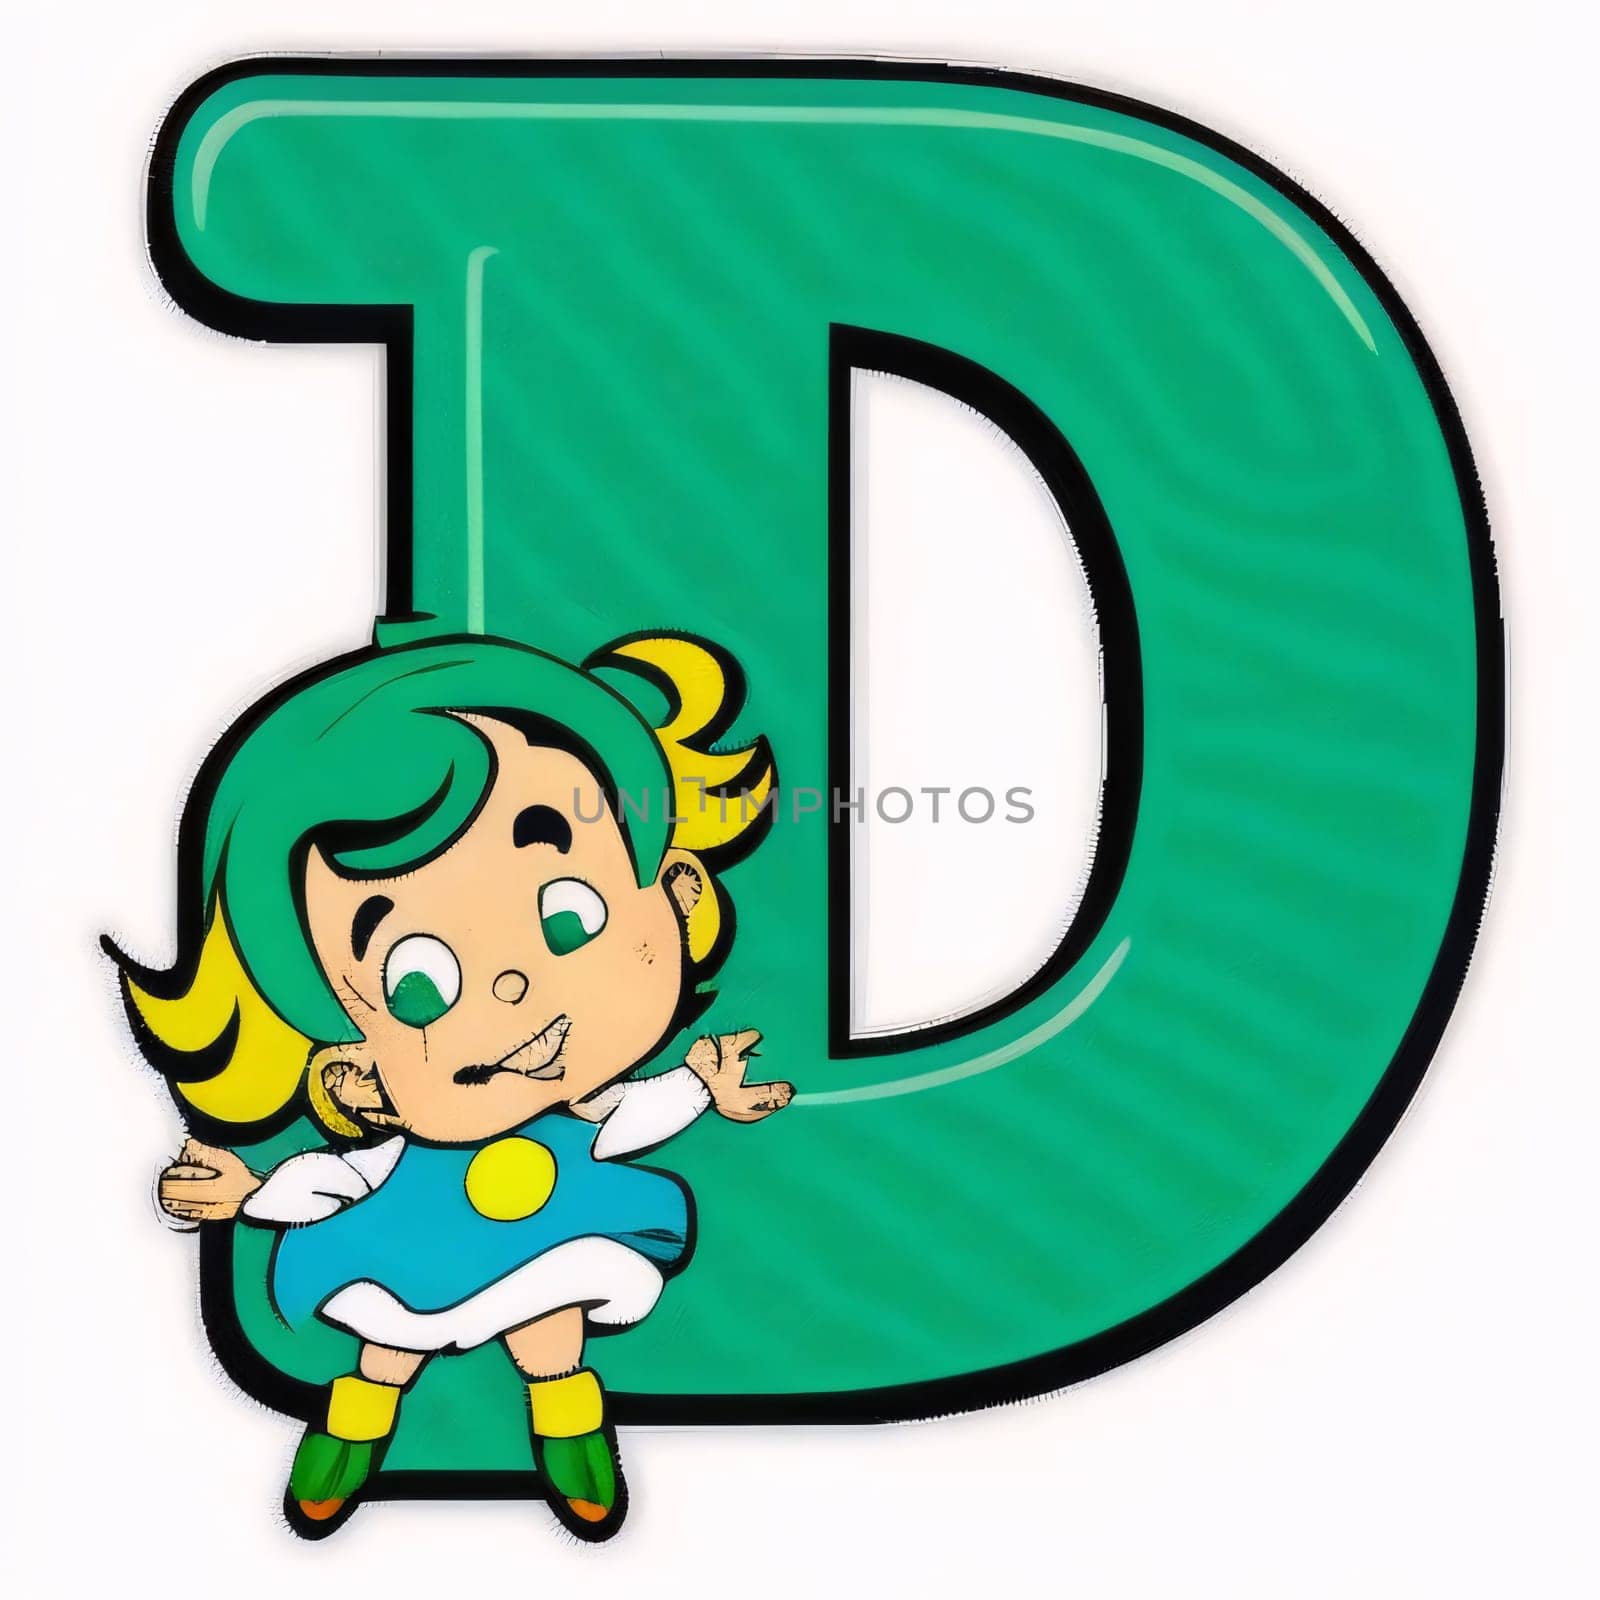 Graphic alphabet letters: Font design for the letter D with a girl in a blue dress